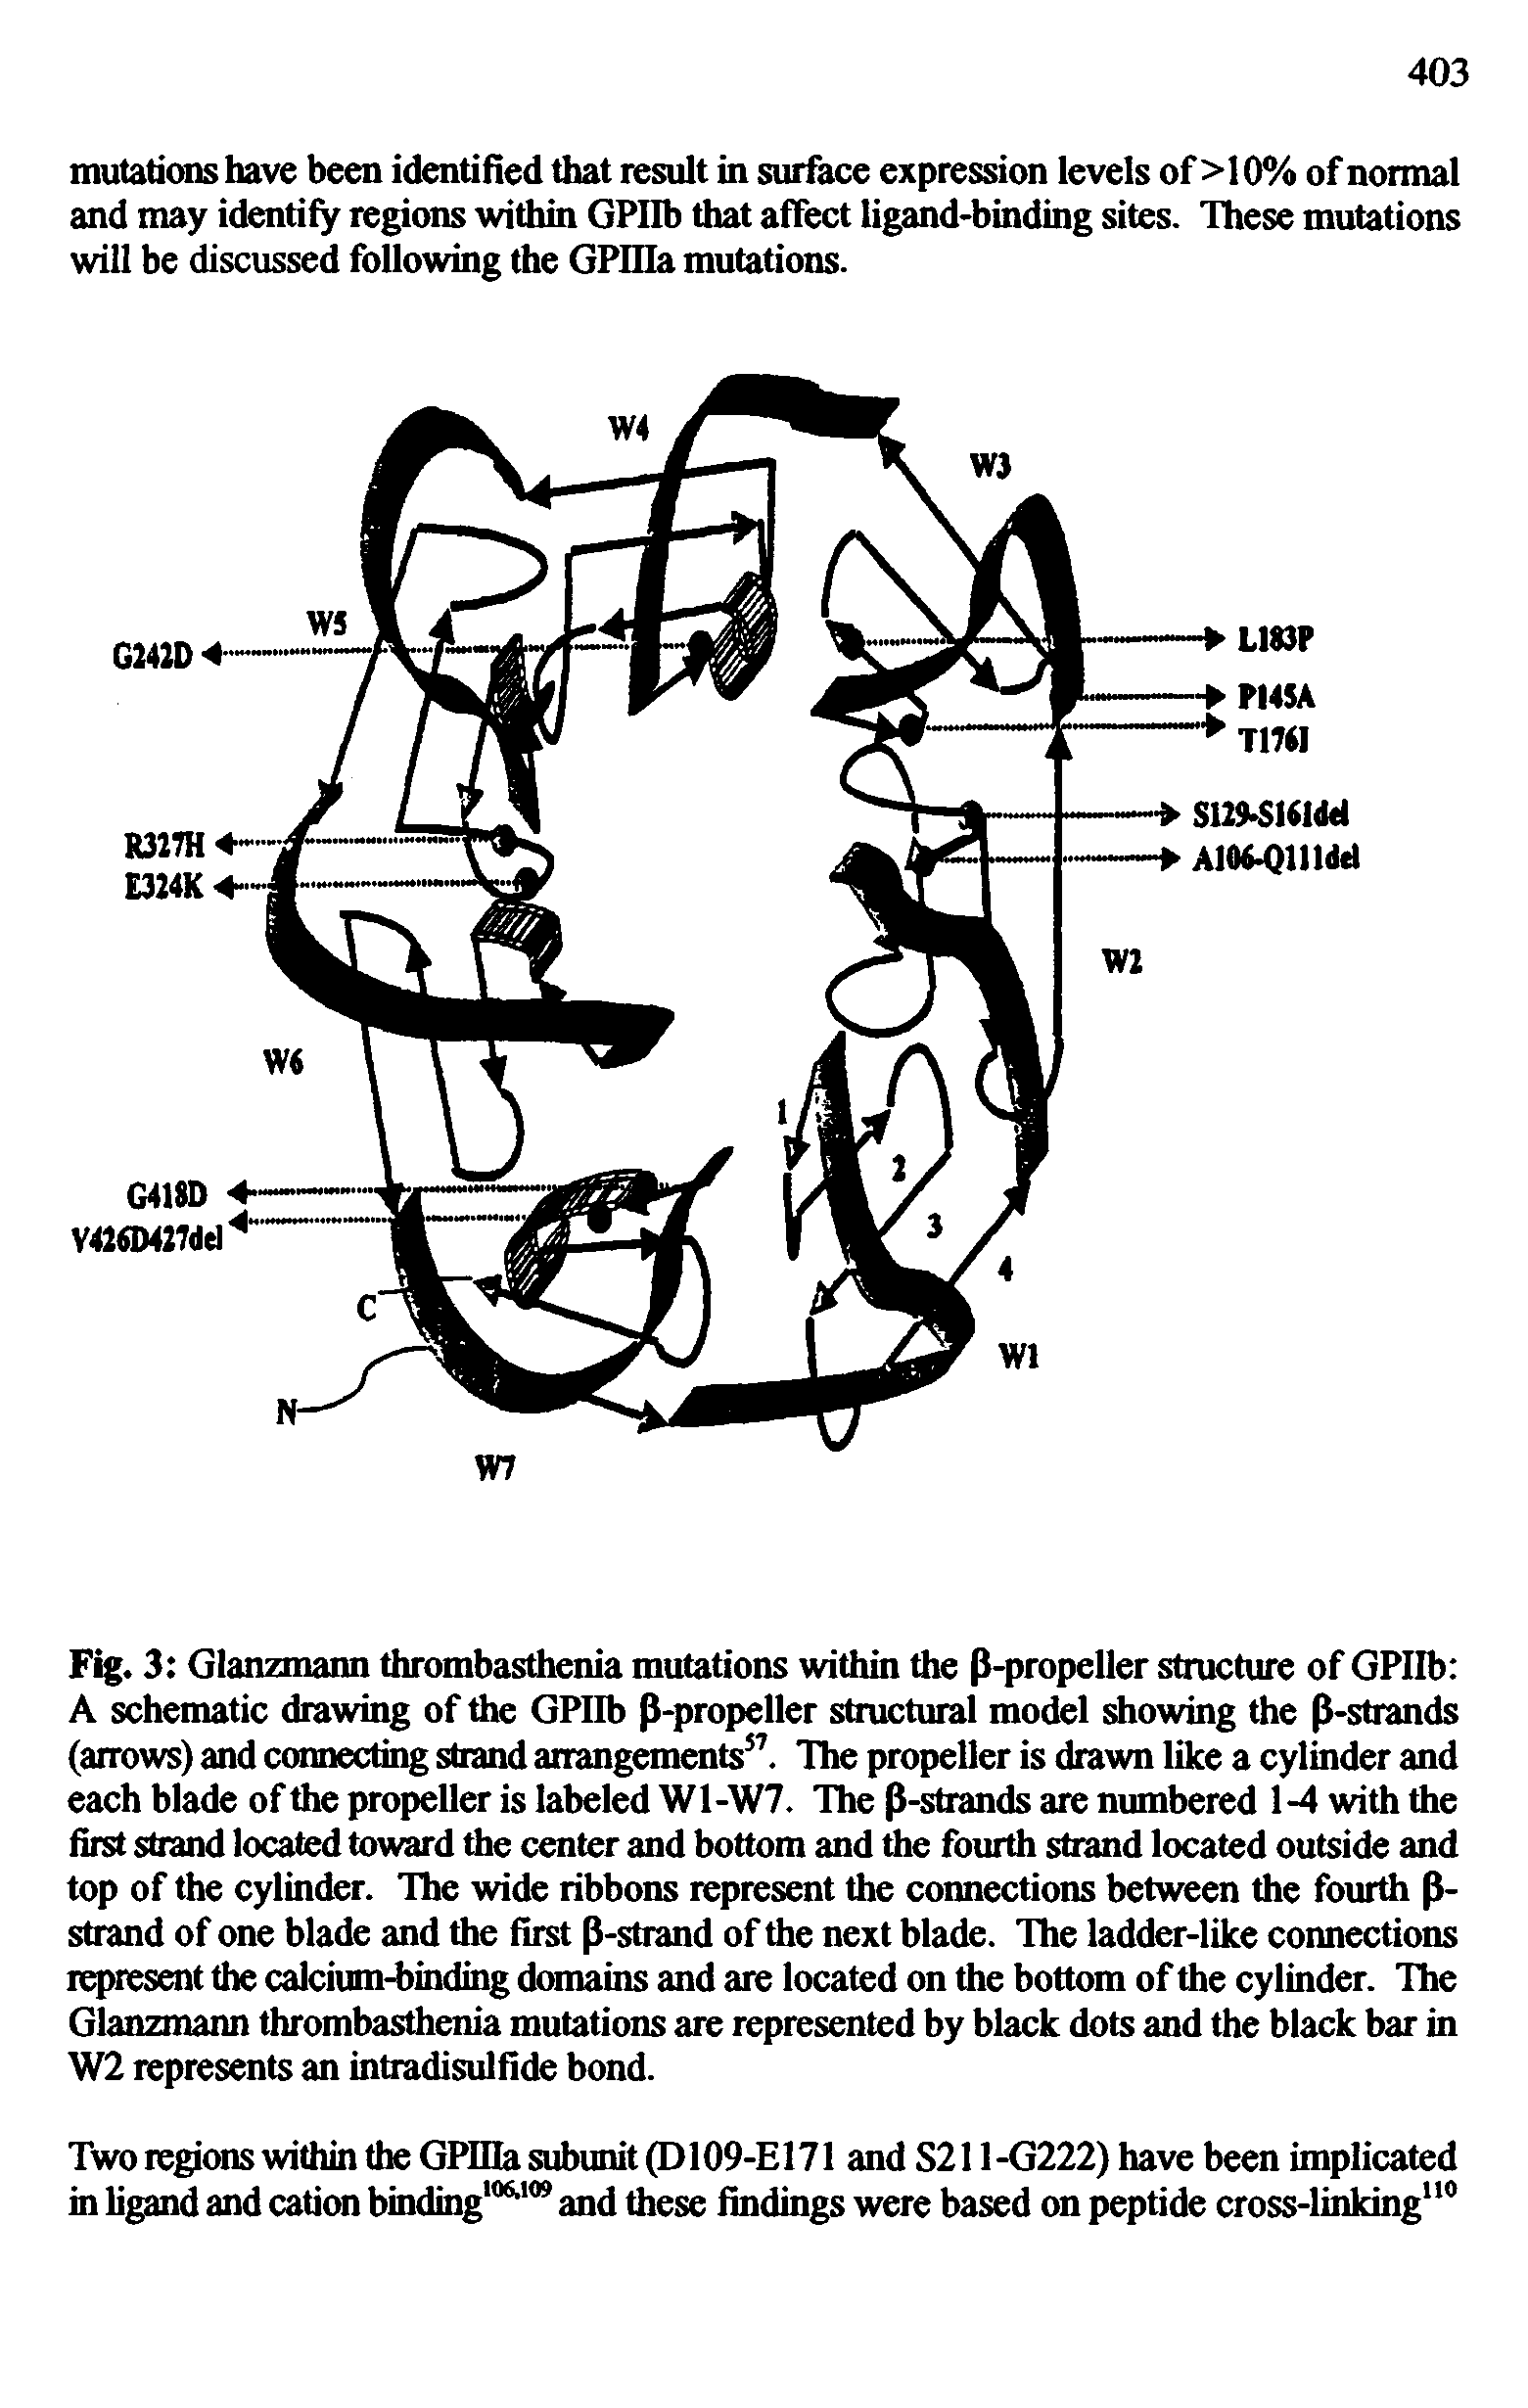 Fig. 3 Glanzmann thrombasthenia mutations within the P-propeller stiucture of GPIIb A schematic drawing of the GPIIb p-propeller structural model showing the P-strands (arrows) and connecting strand arrangements . The propeller is drawn like a cylinder and each blade of the propeller is labeled W1-W7. The P-strands are numbered 1-4 with the first strand located toward the center and bottom and the fourth strand located outside and top of the cylinder. Hie wide ribbons represent the connections between the fourth P-strand of one blade and the first p-strand of the next blade. The ladder-like connections represent the calcium-binding domains and are located on the bottom of the cylinder. The Glanzmann thrombasthenia mutations are represented by black dots and the black bar in W2 represents an intradisulfide bond.